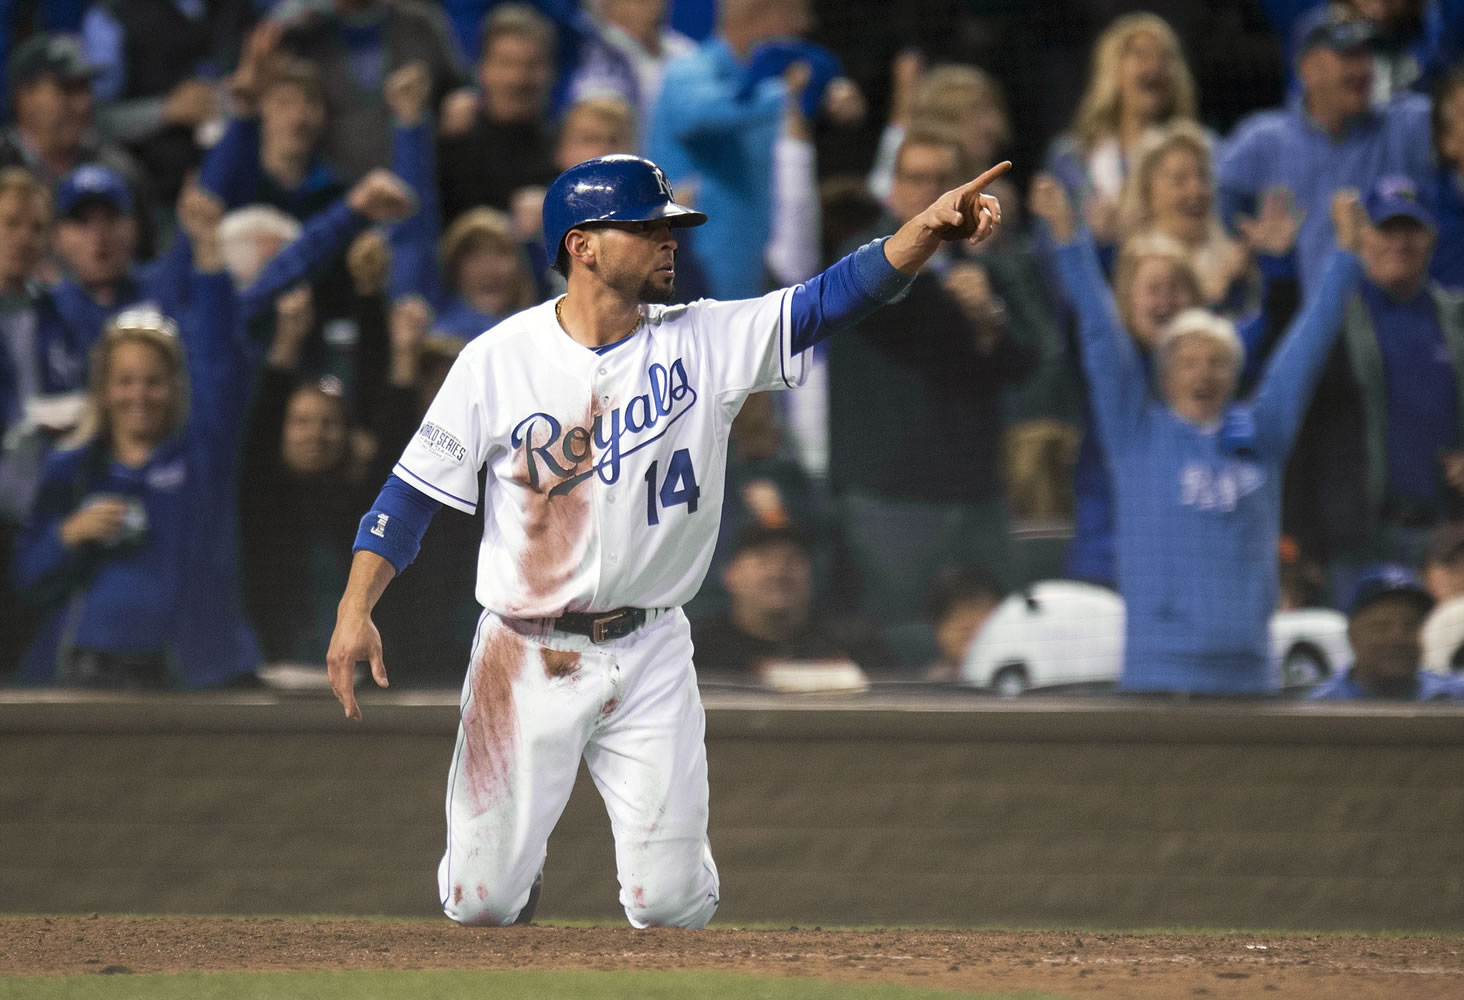 Kansas City Royals second baseman Omar Infante points after he dove past San Francisco Giants catcher Buster Posey to score in the fifth inning of Game 6 of the World Series in Kansas City, Mo.